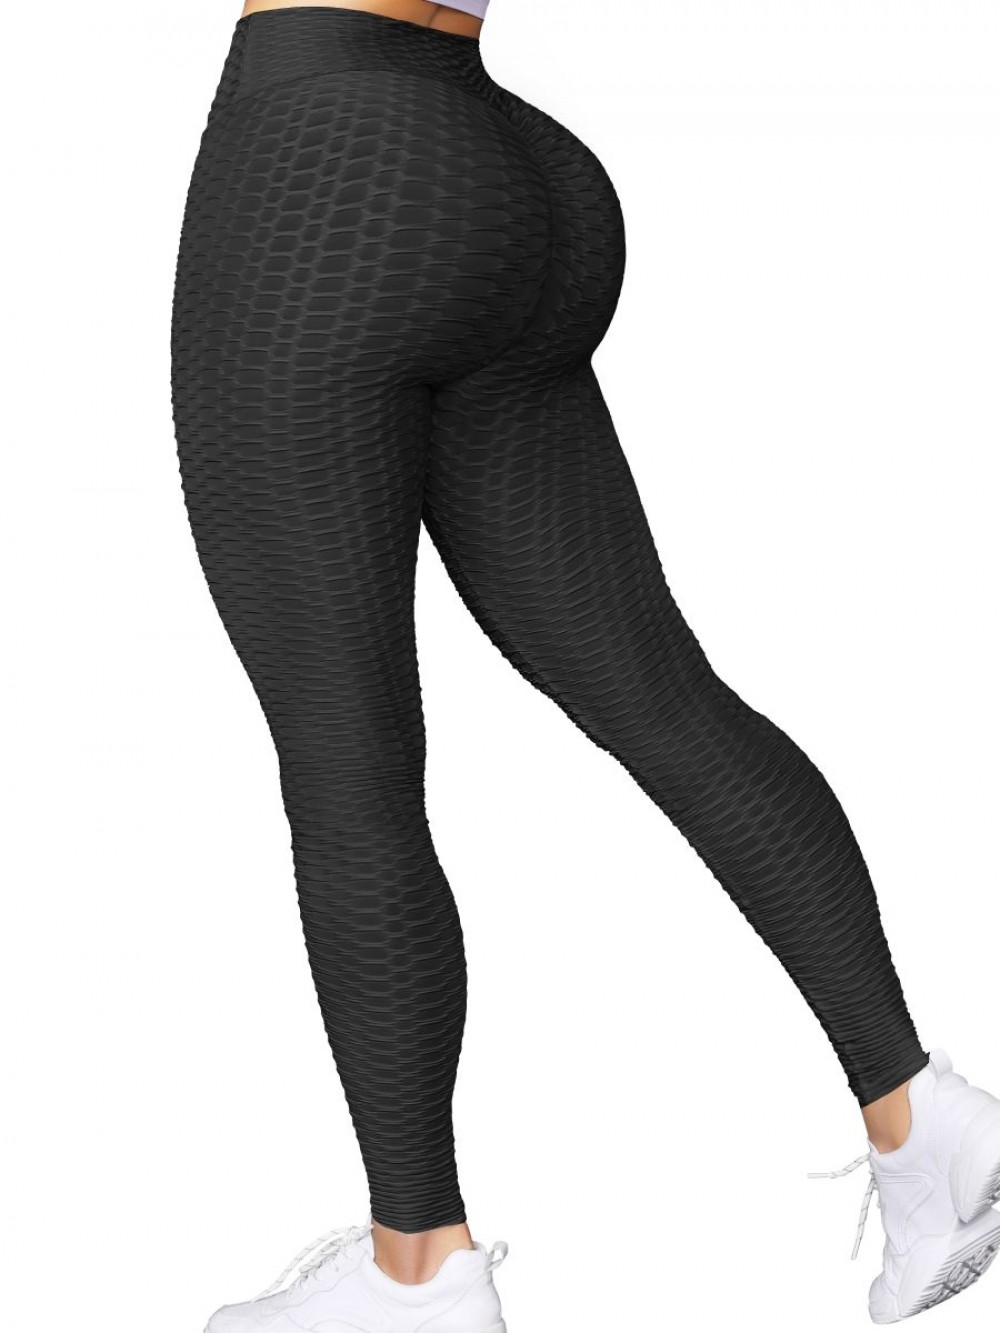 Black Ruched Yoga Legging Ankle Length High Rise Fast Shipping